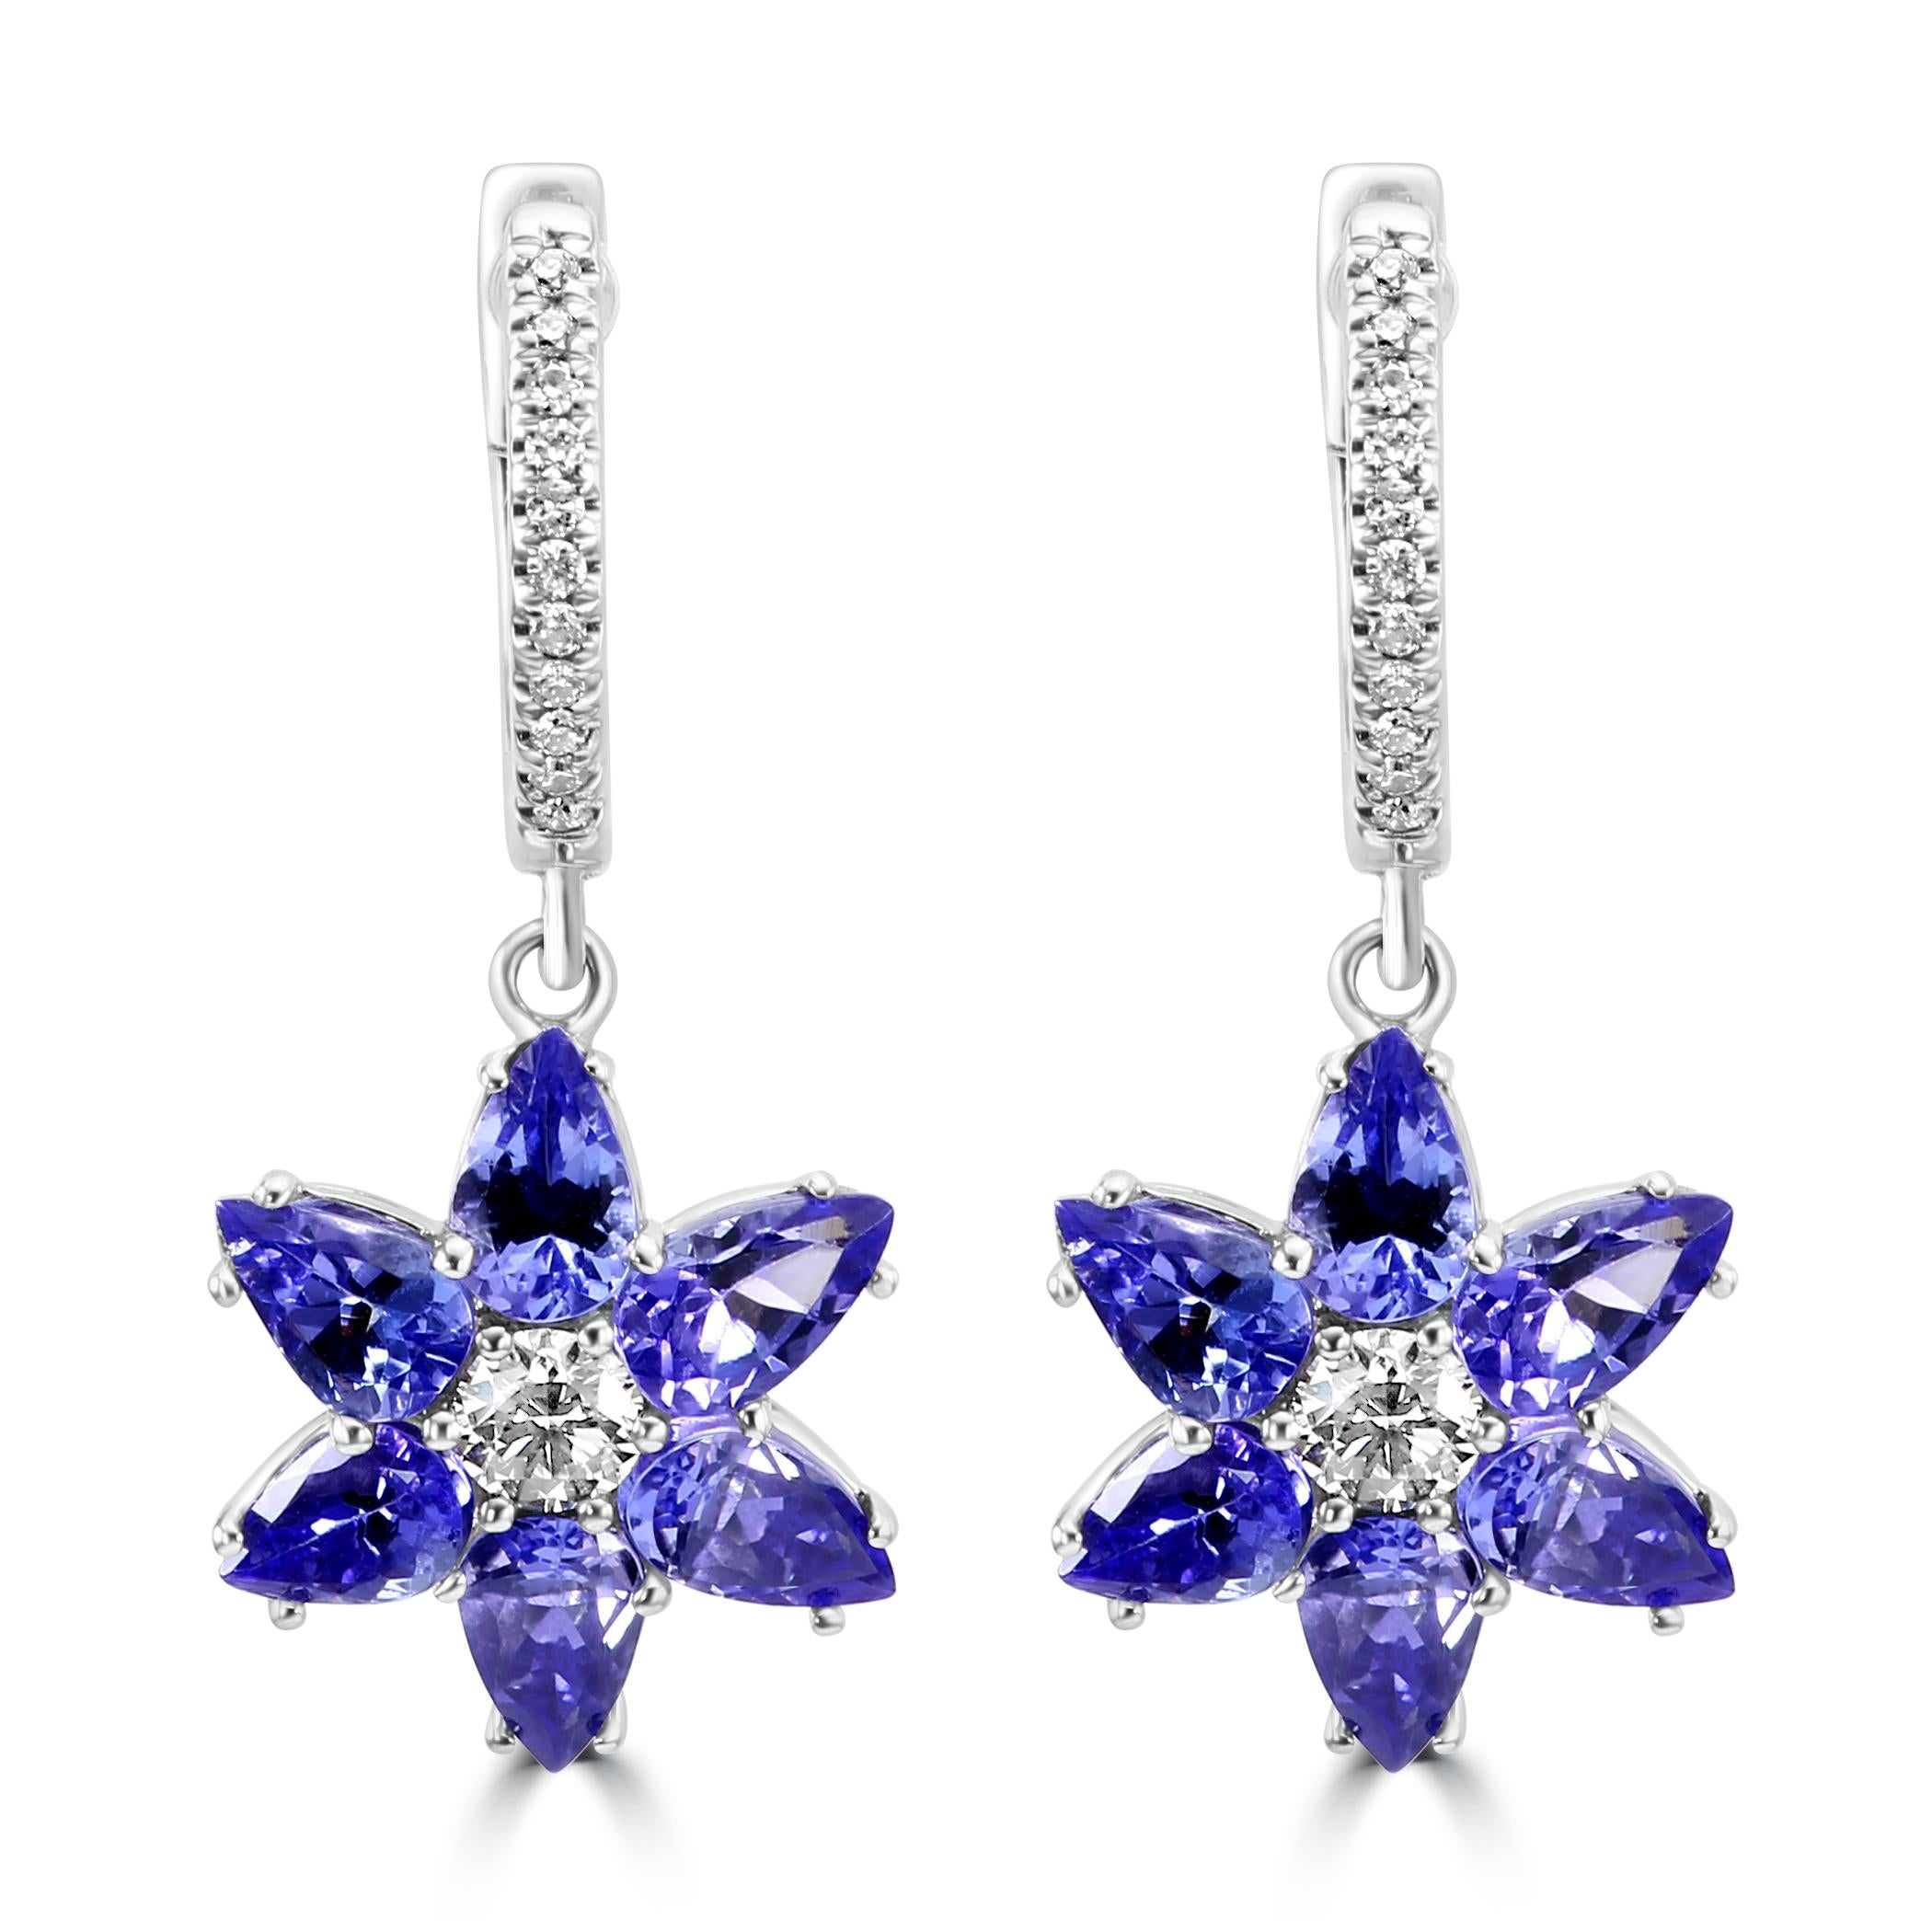 Embark on a journey of floral elegance with our dangling fashion flower-shaped earrings. 

The true beauty of these earrings lies in the intricate flower design crafted from pear shaped Tanzanite's, each petal meticulously set to create a lush and